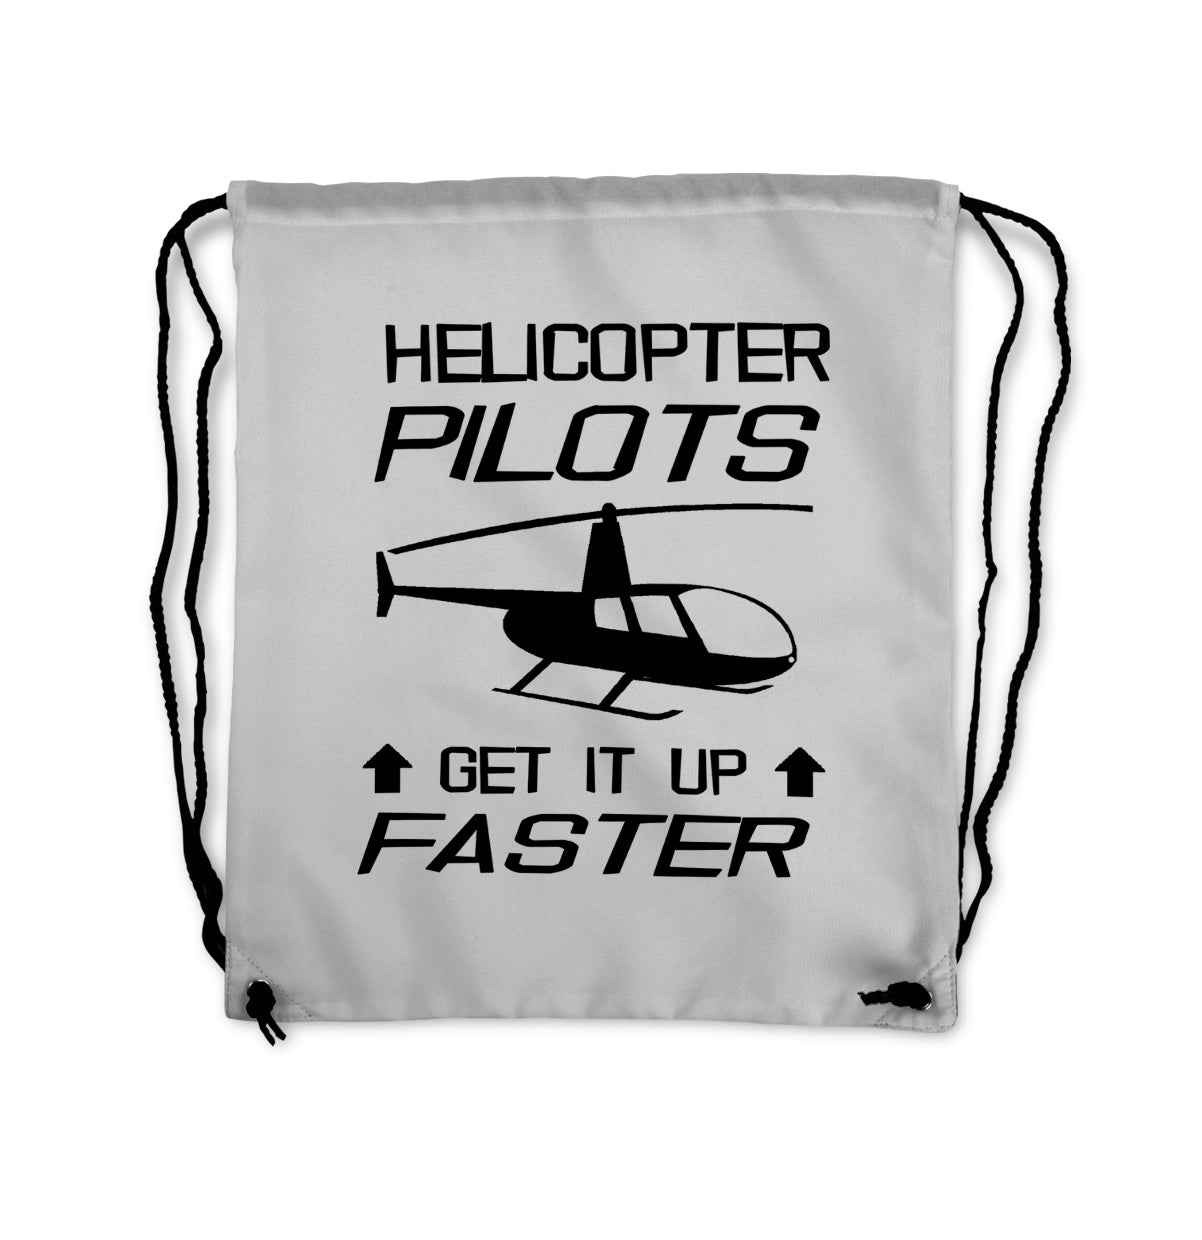 Helicopter Pilots Get It Up Faster Designed Drawstring Bags